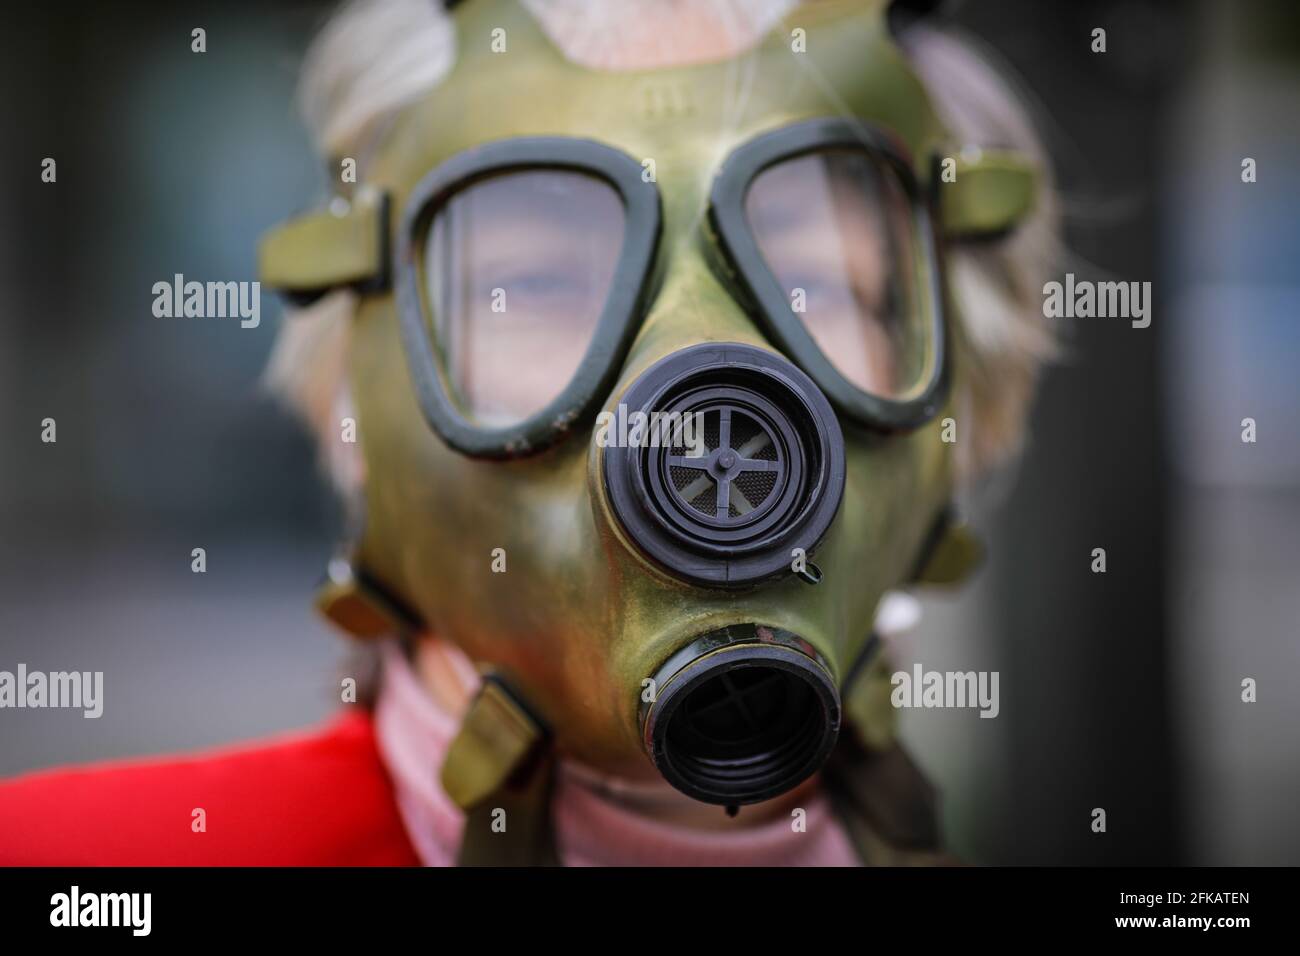 Shallow depth of field (selective focus) image with an old and worn out military gas mask without filters on the face of a senior woman. Stock Photo